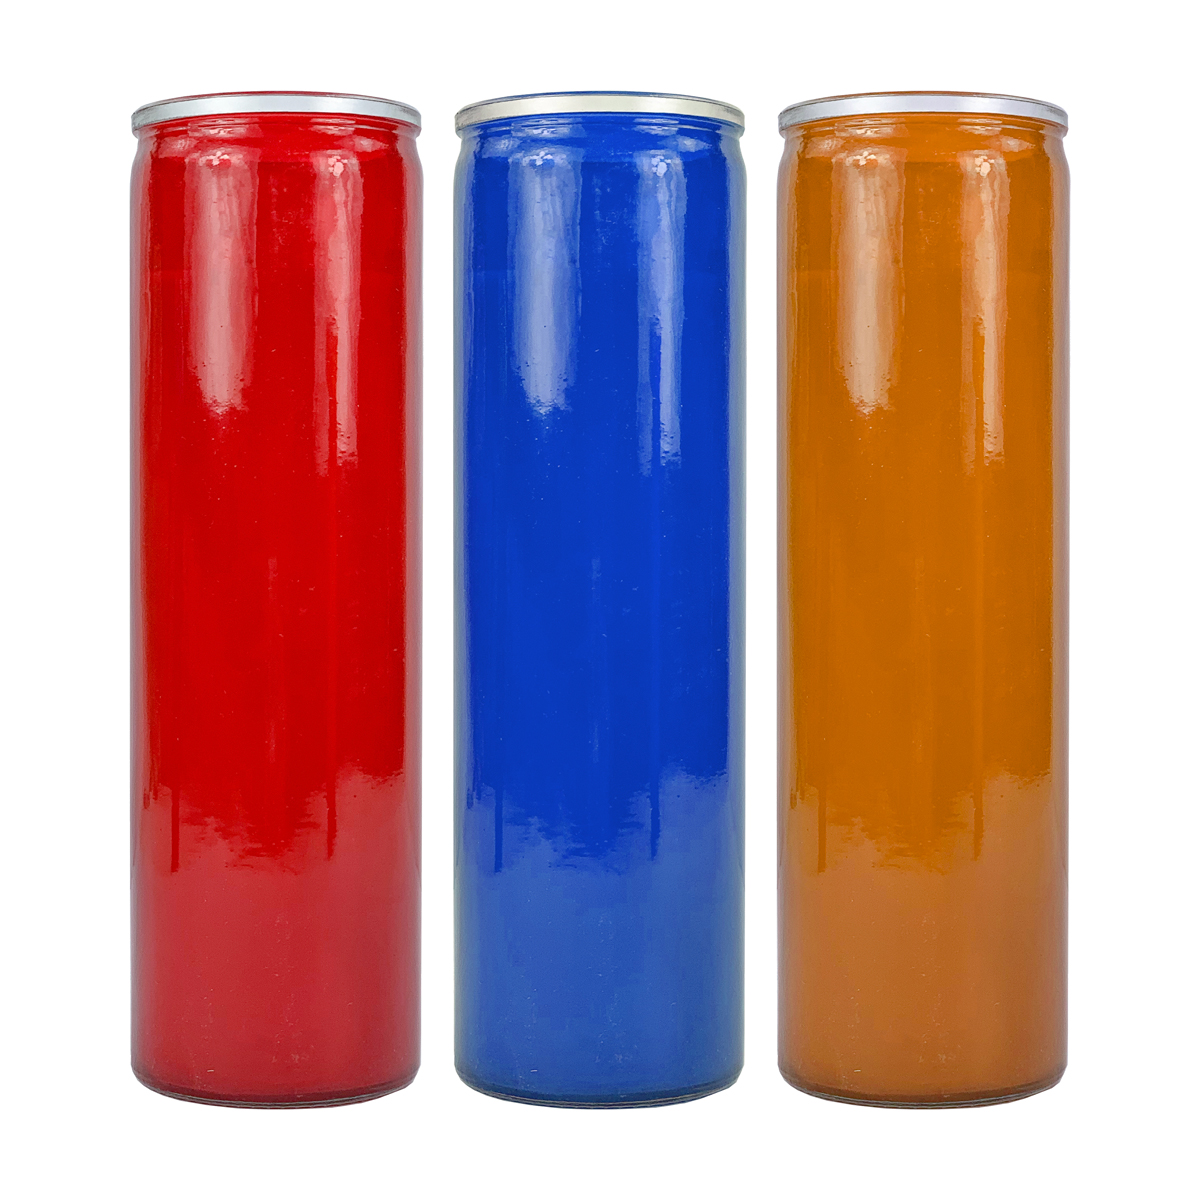 TALL COLORED GLASS CONTAINER CANDLES RED, BLUE, Amber